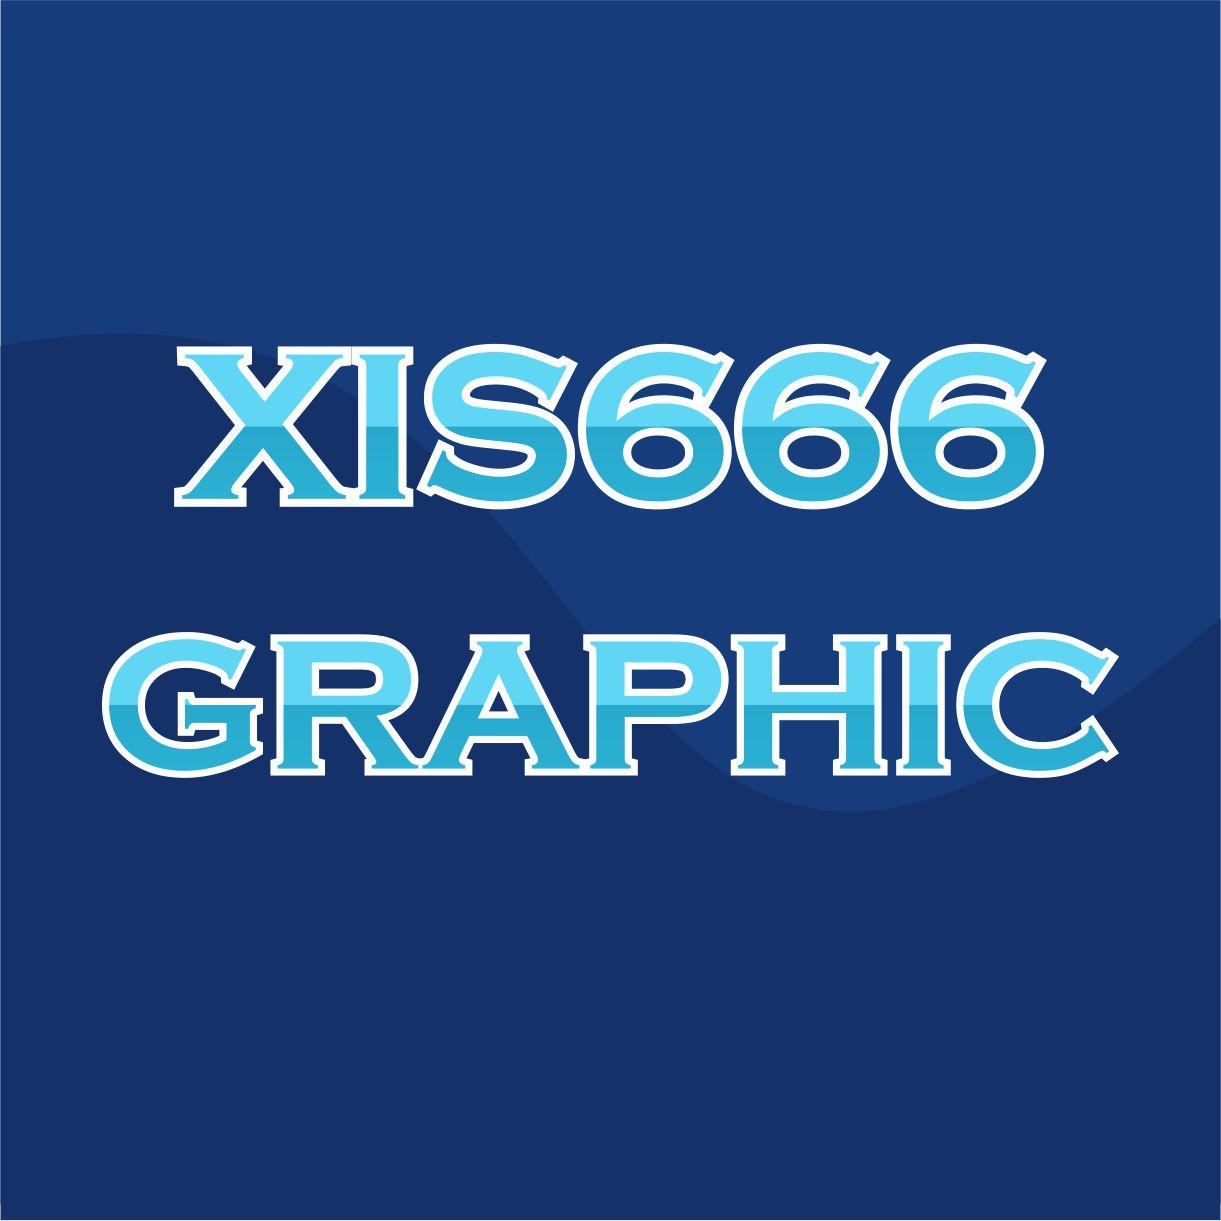 xis666.graphic